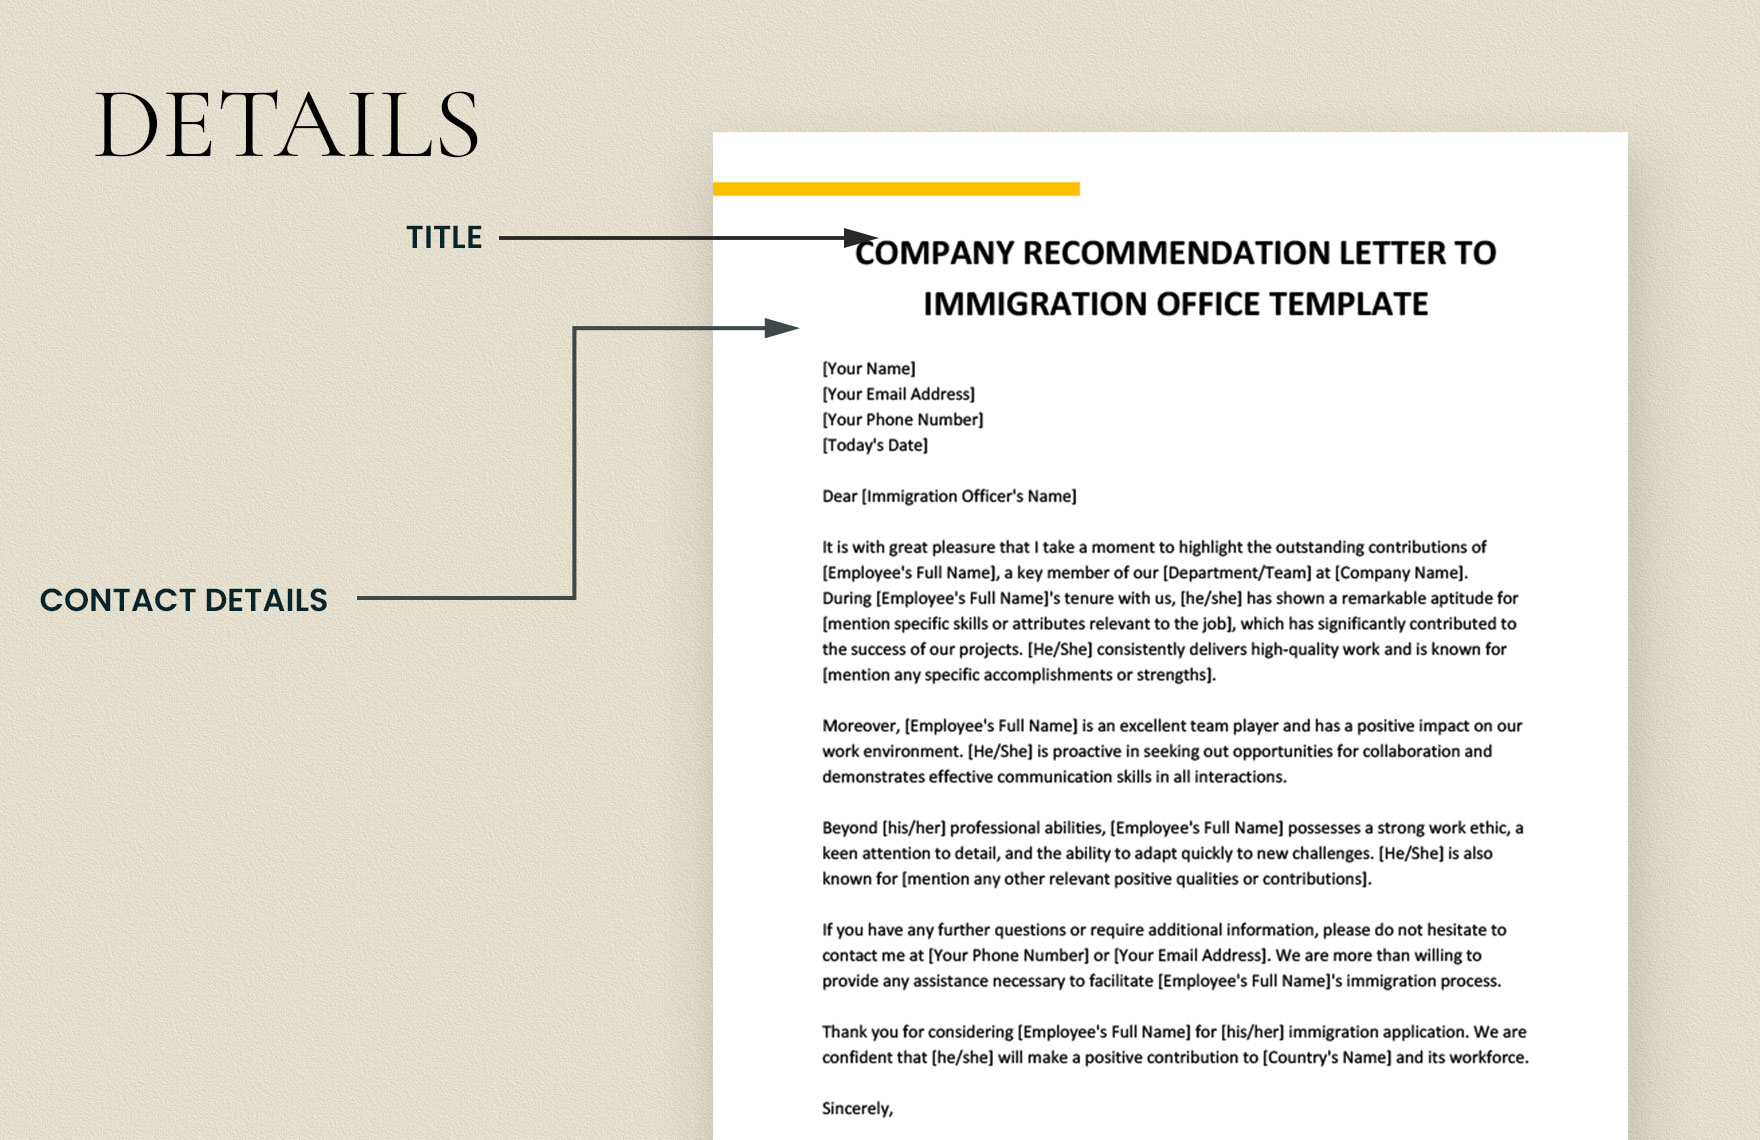 Company Recommendation Letter to Immigration Office Template